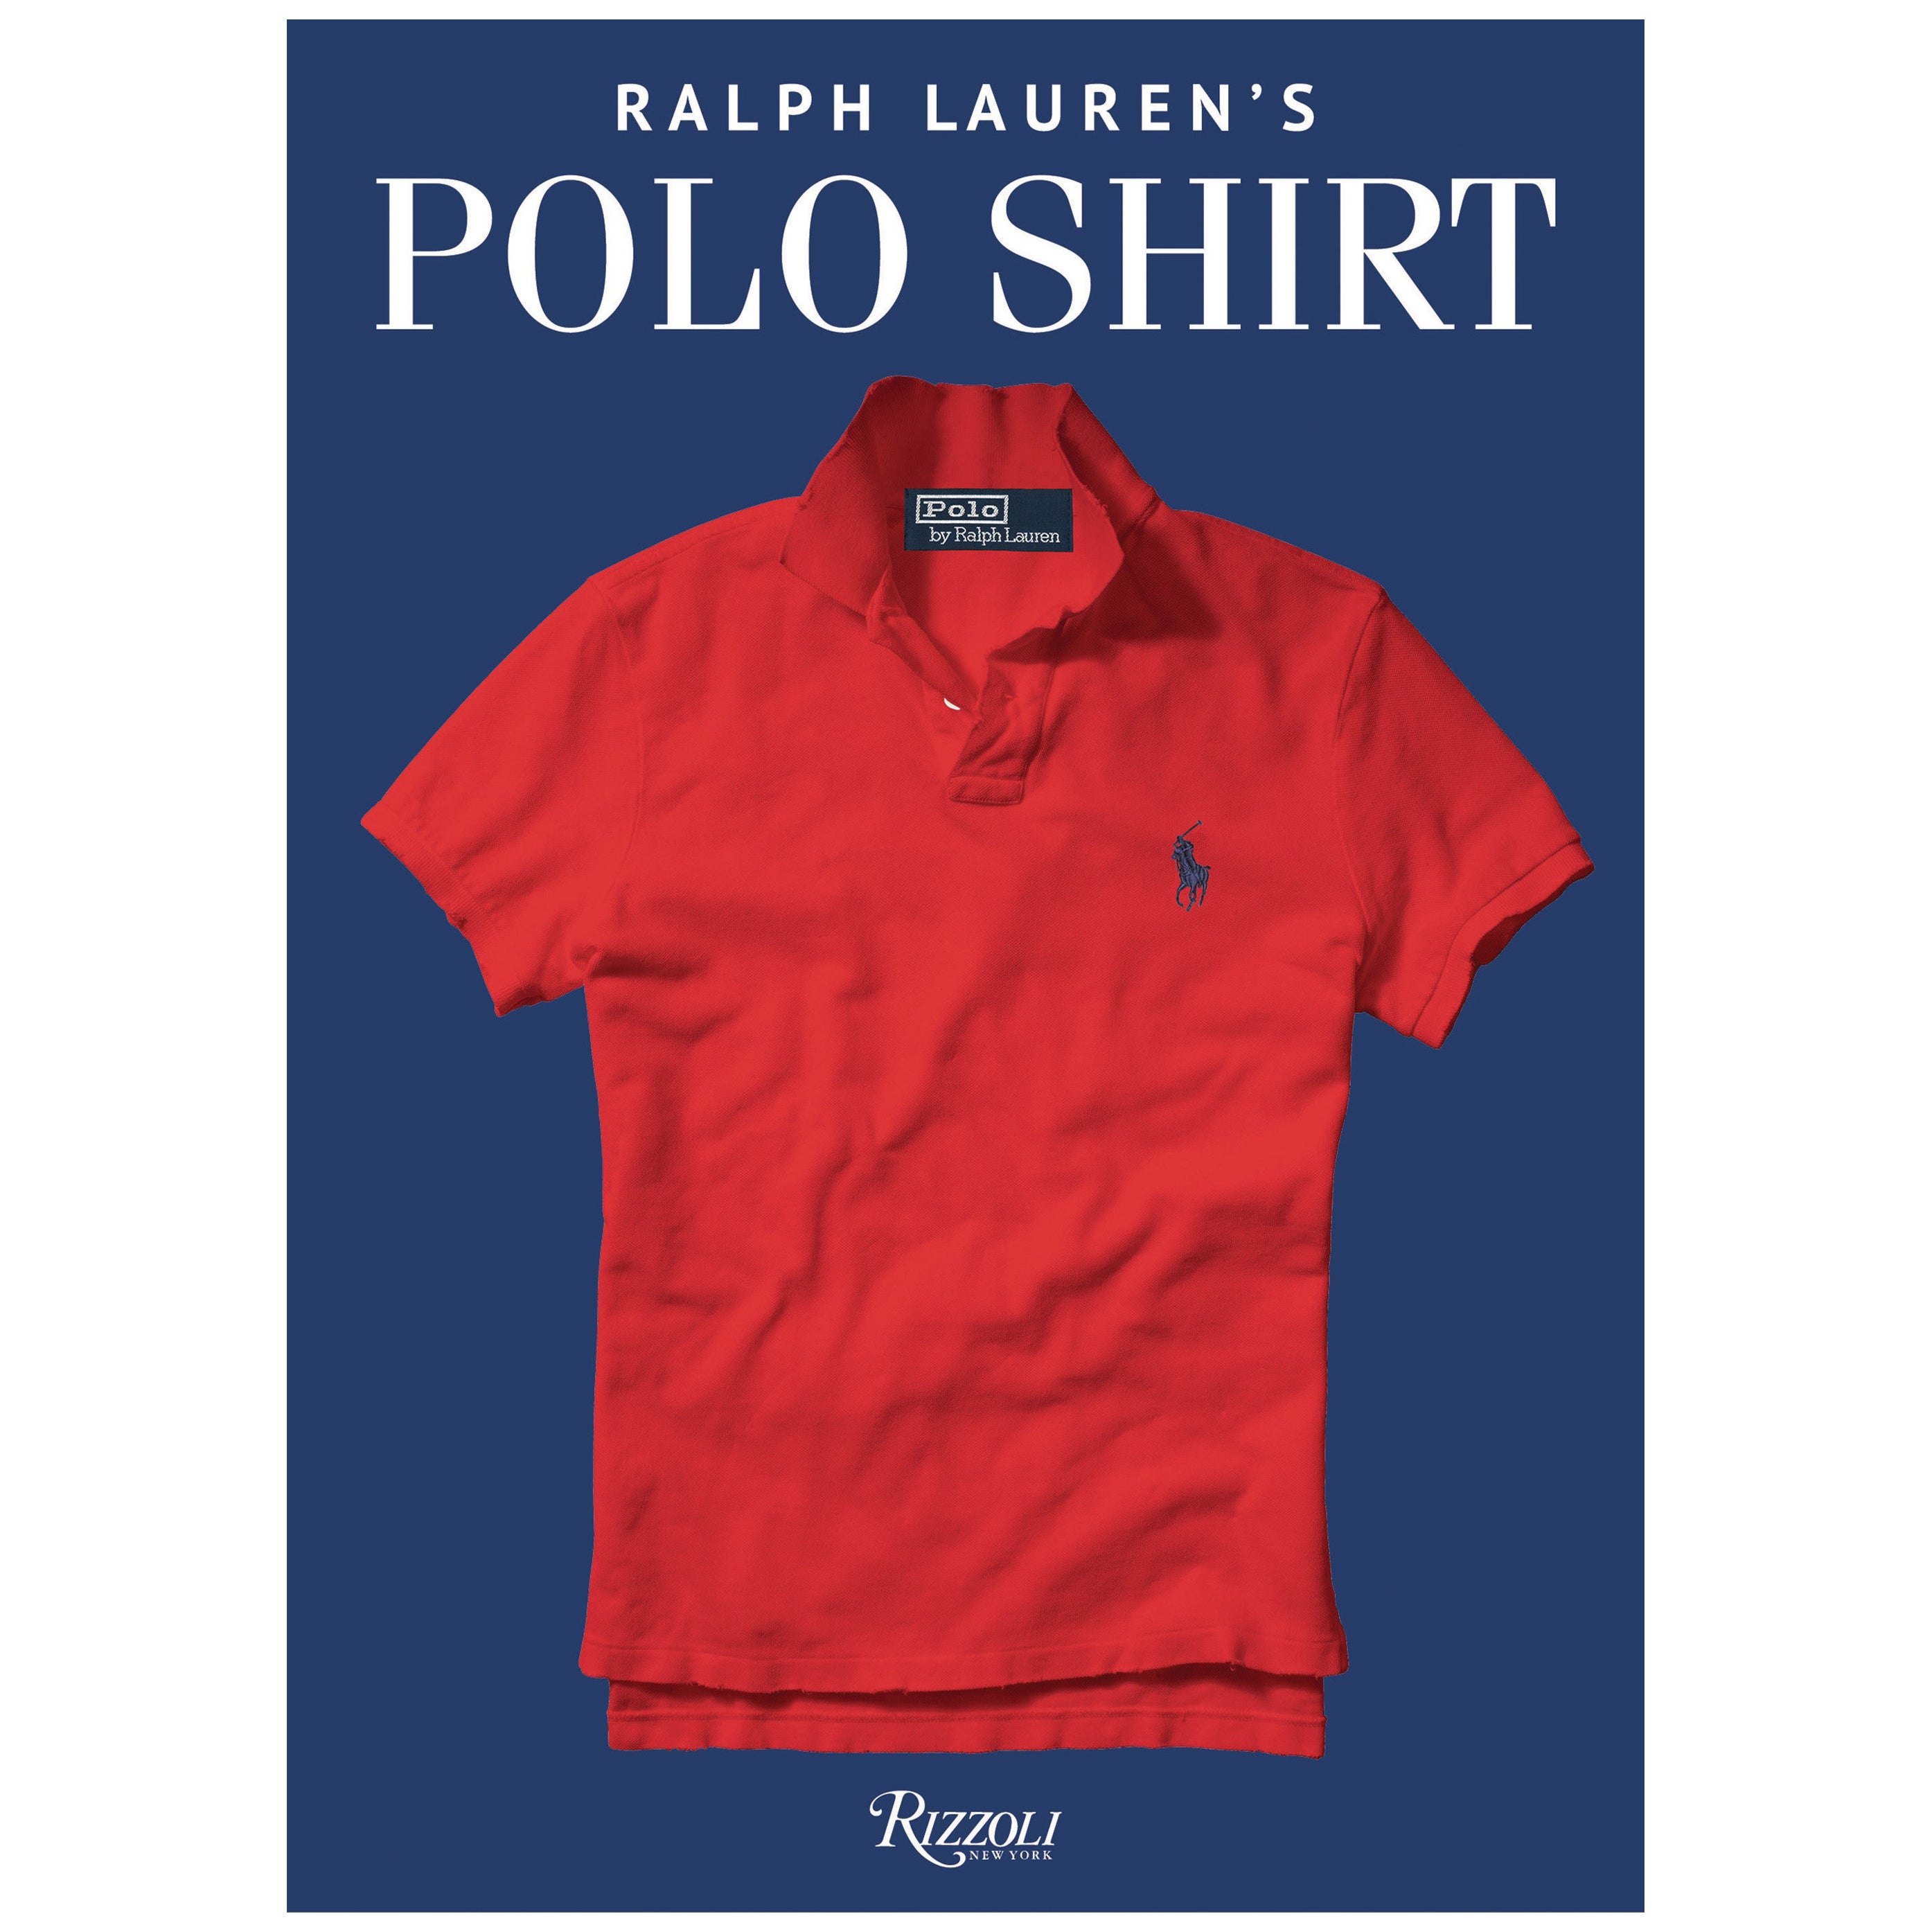 Ralph Lauren's Polo Shirt For Sale at 1stDibs